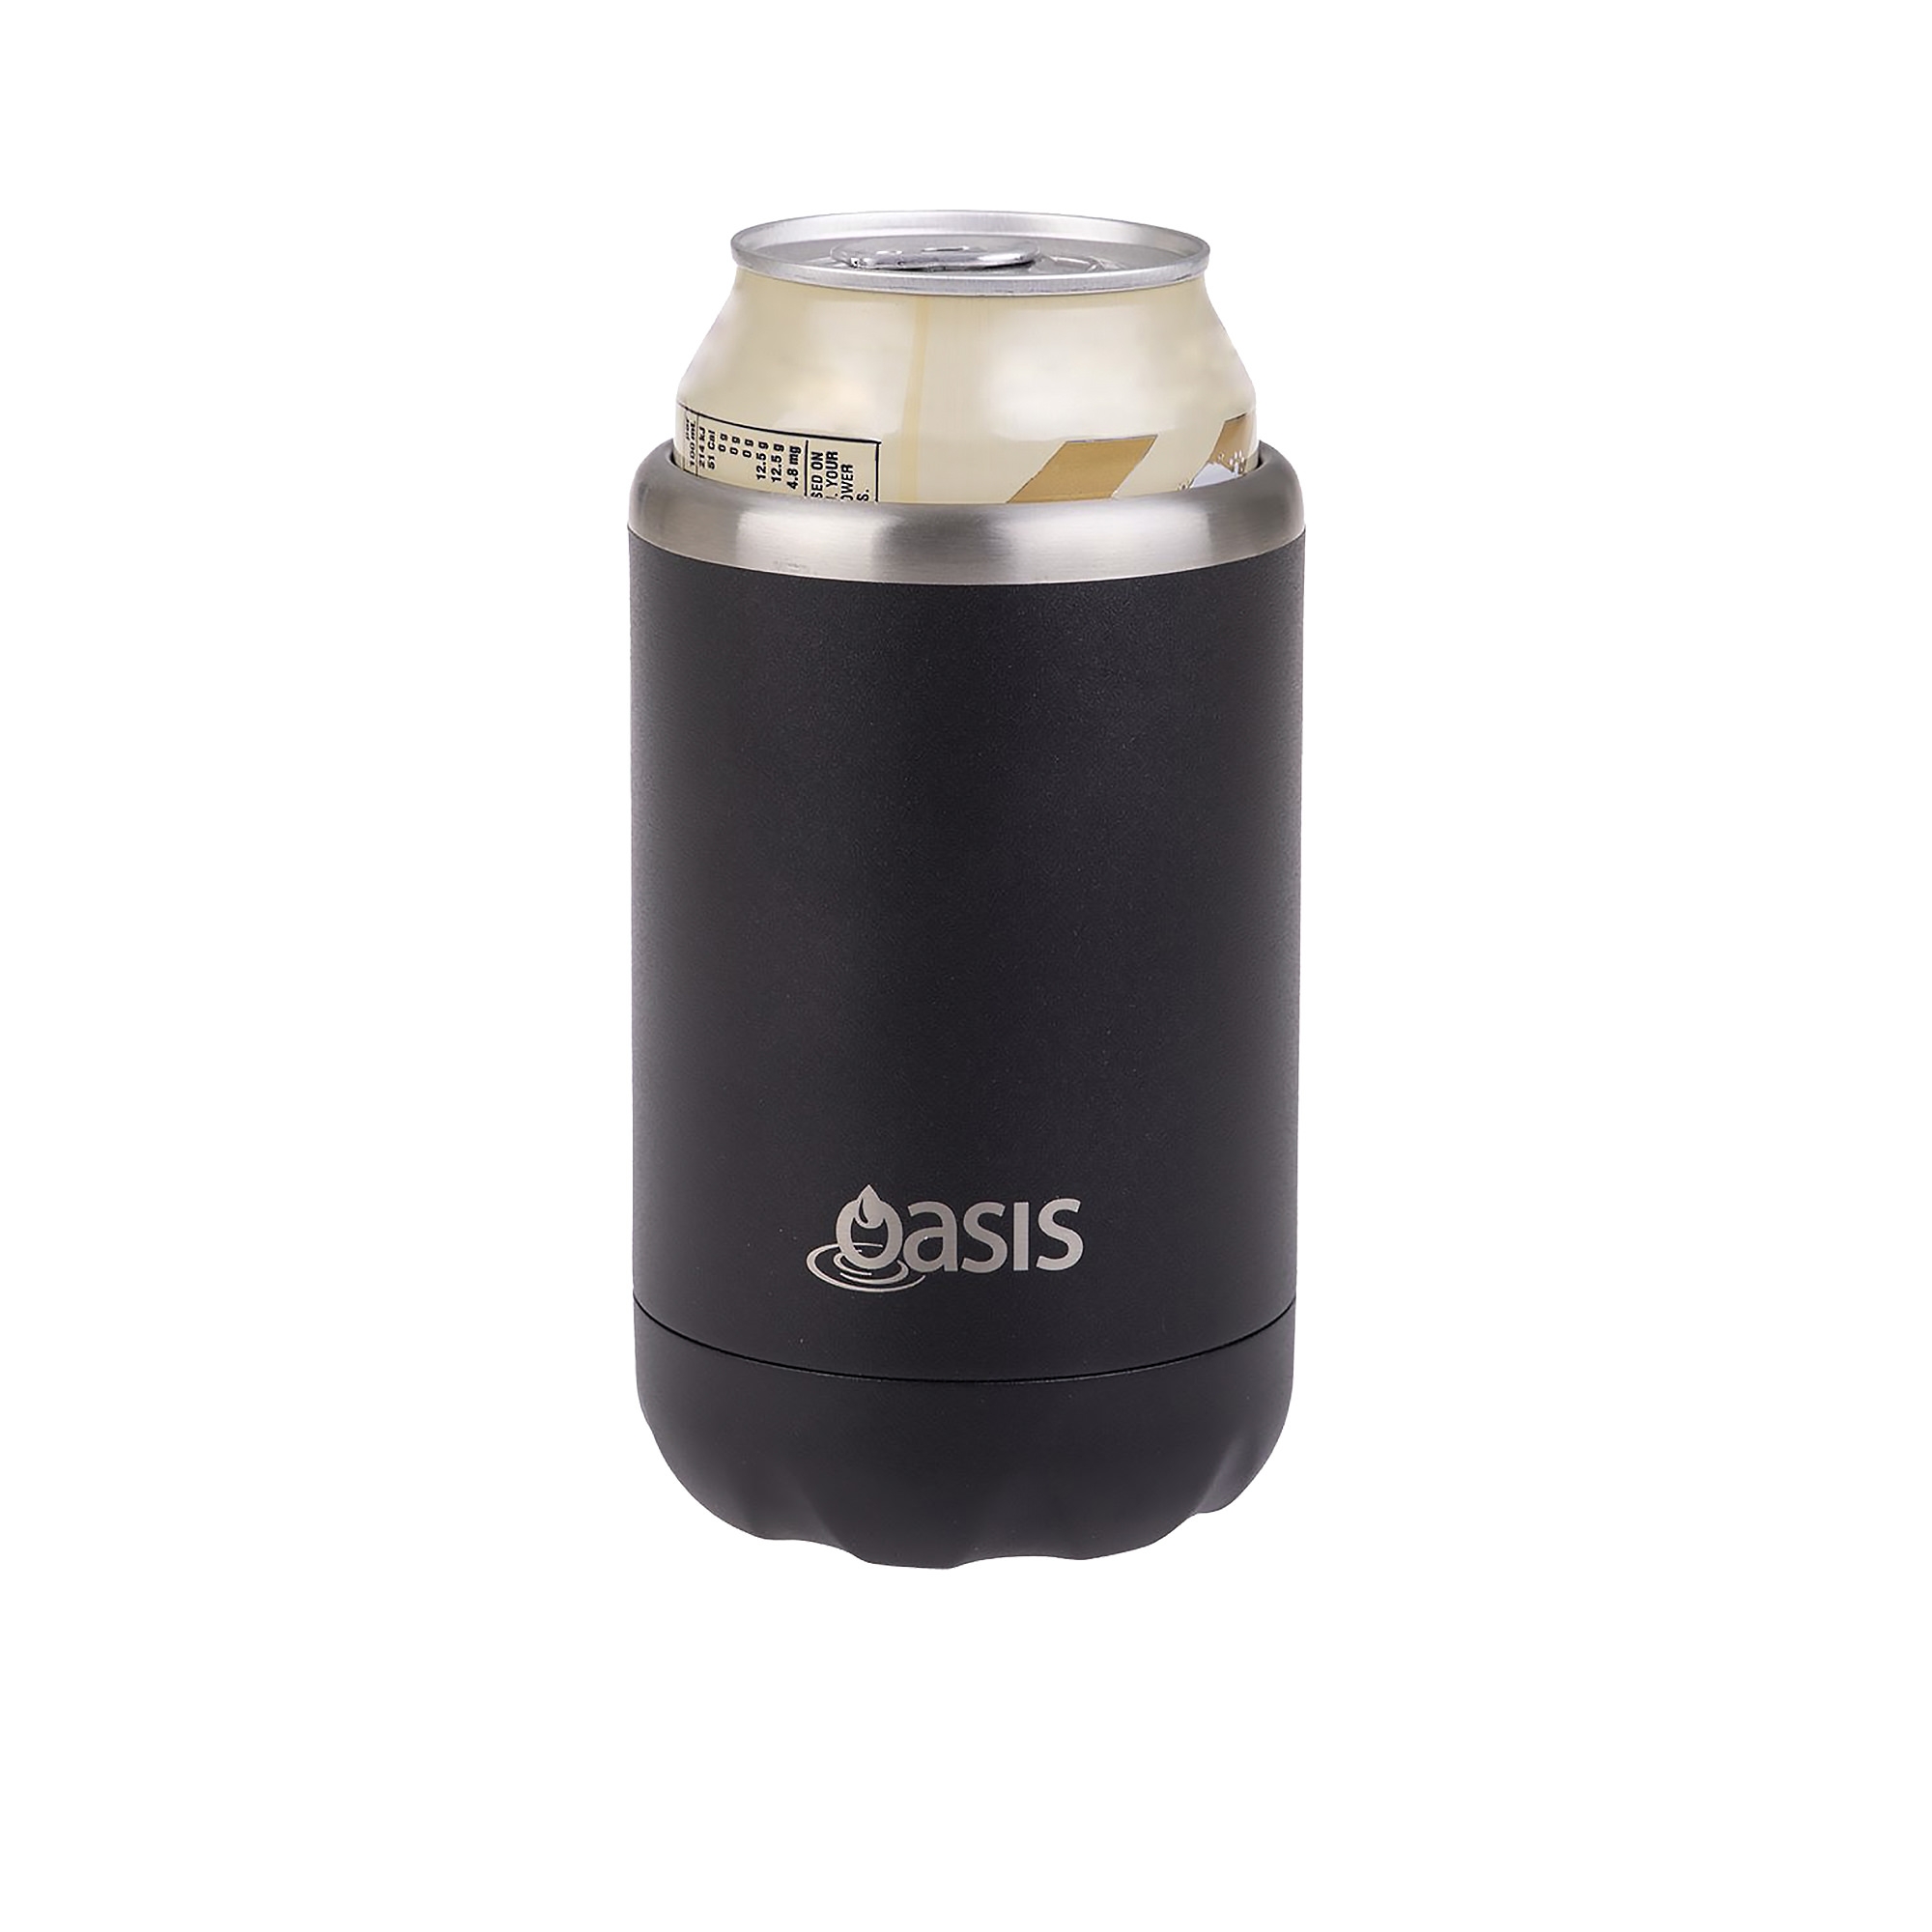 Oasis Double Wall Insulated Cooler Can 375ml Black Image 2